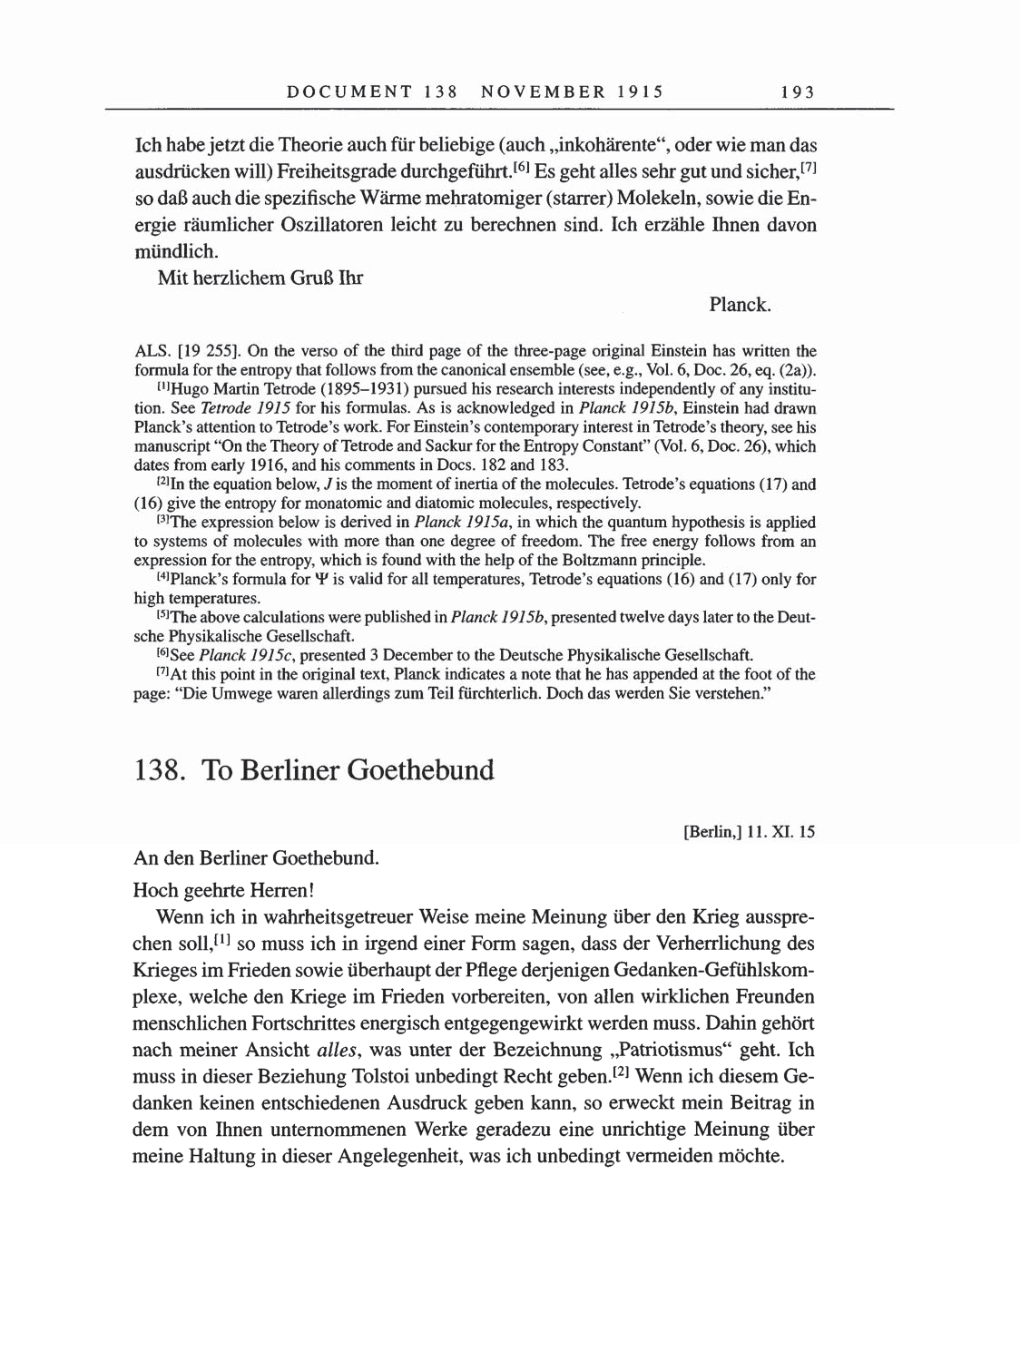 Volume 8, Part A: The Berlin Years: Correspondence 1914-1917 page 193